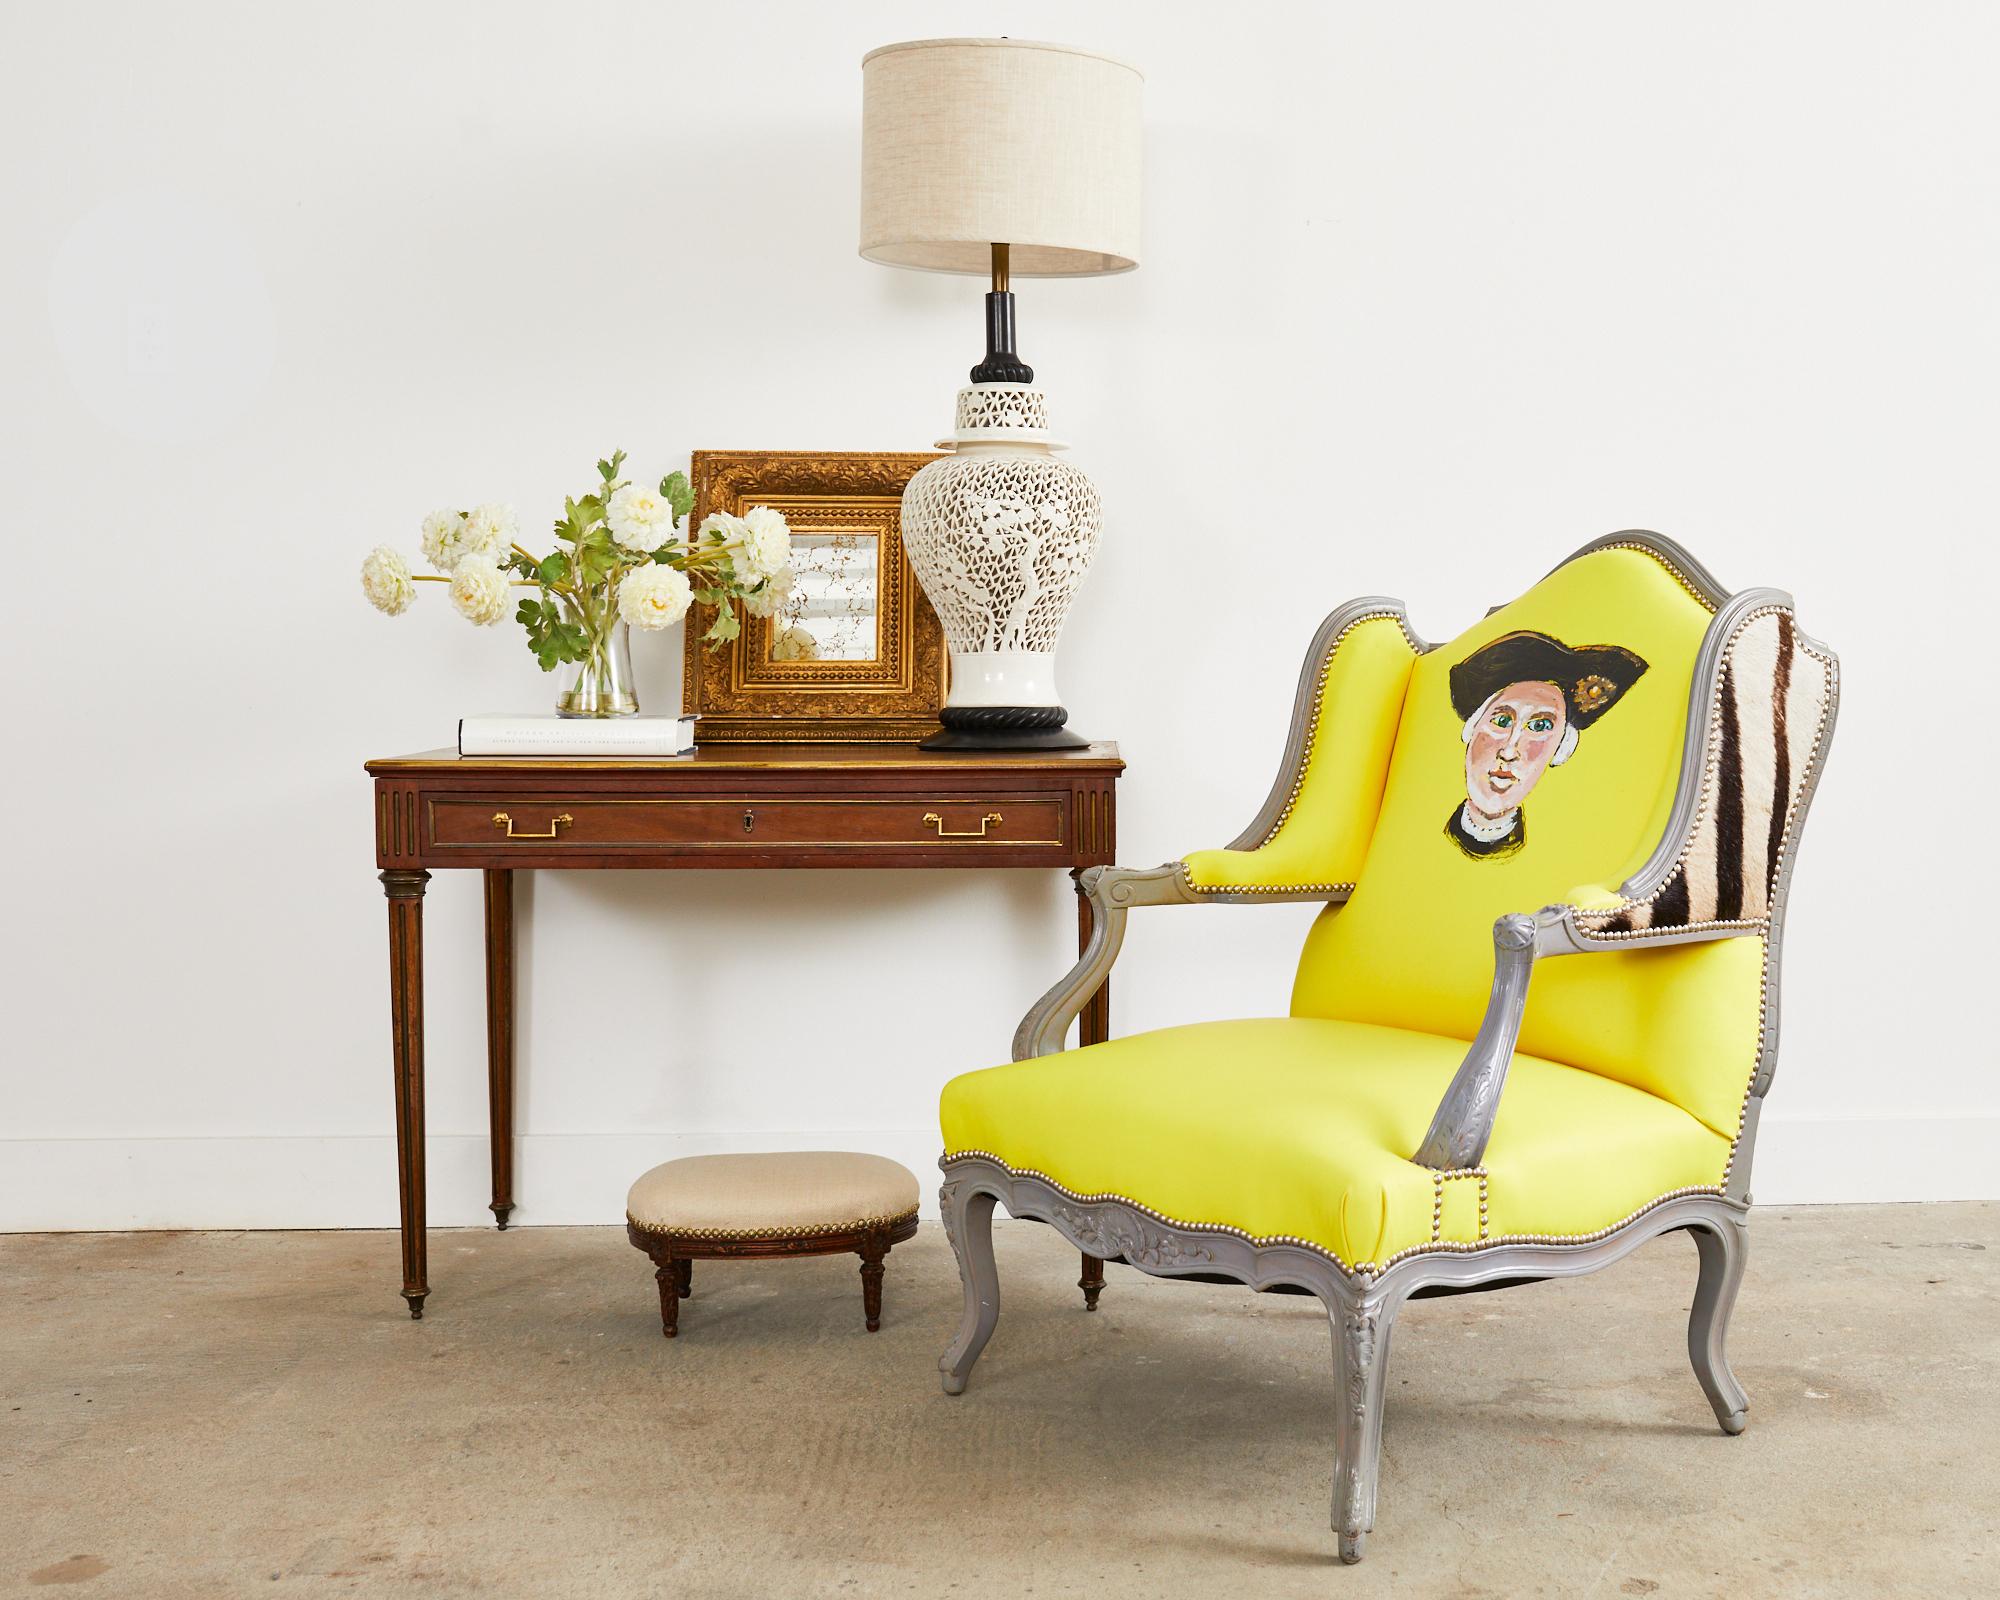 Whimsical country French provincial Fauteuil a La Reine a Oreilles or queen's wingback armchair with ears by artist Ira Yeager (American 1938-2022). The extra large size Queen's chair or chair-and-a-half is lacquered grey with an intentionally aged